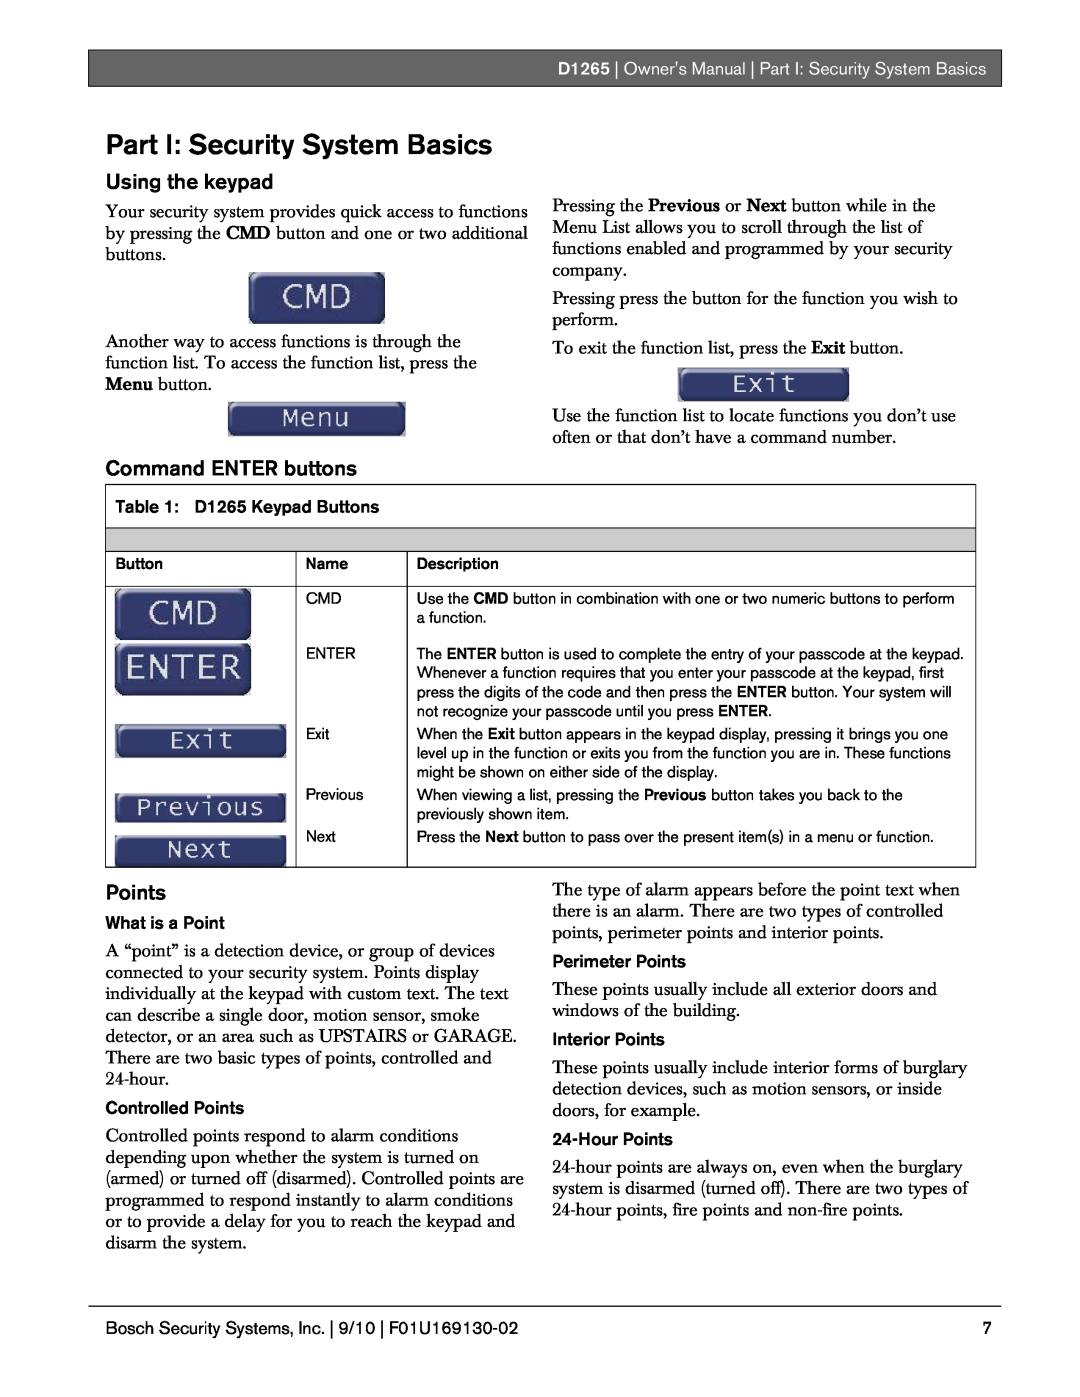 Bosch Appliances D1265 owner manual Part I: Security System Basics, Using the keypad, Command ENTER buttons, Points 